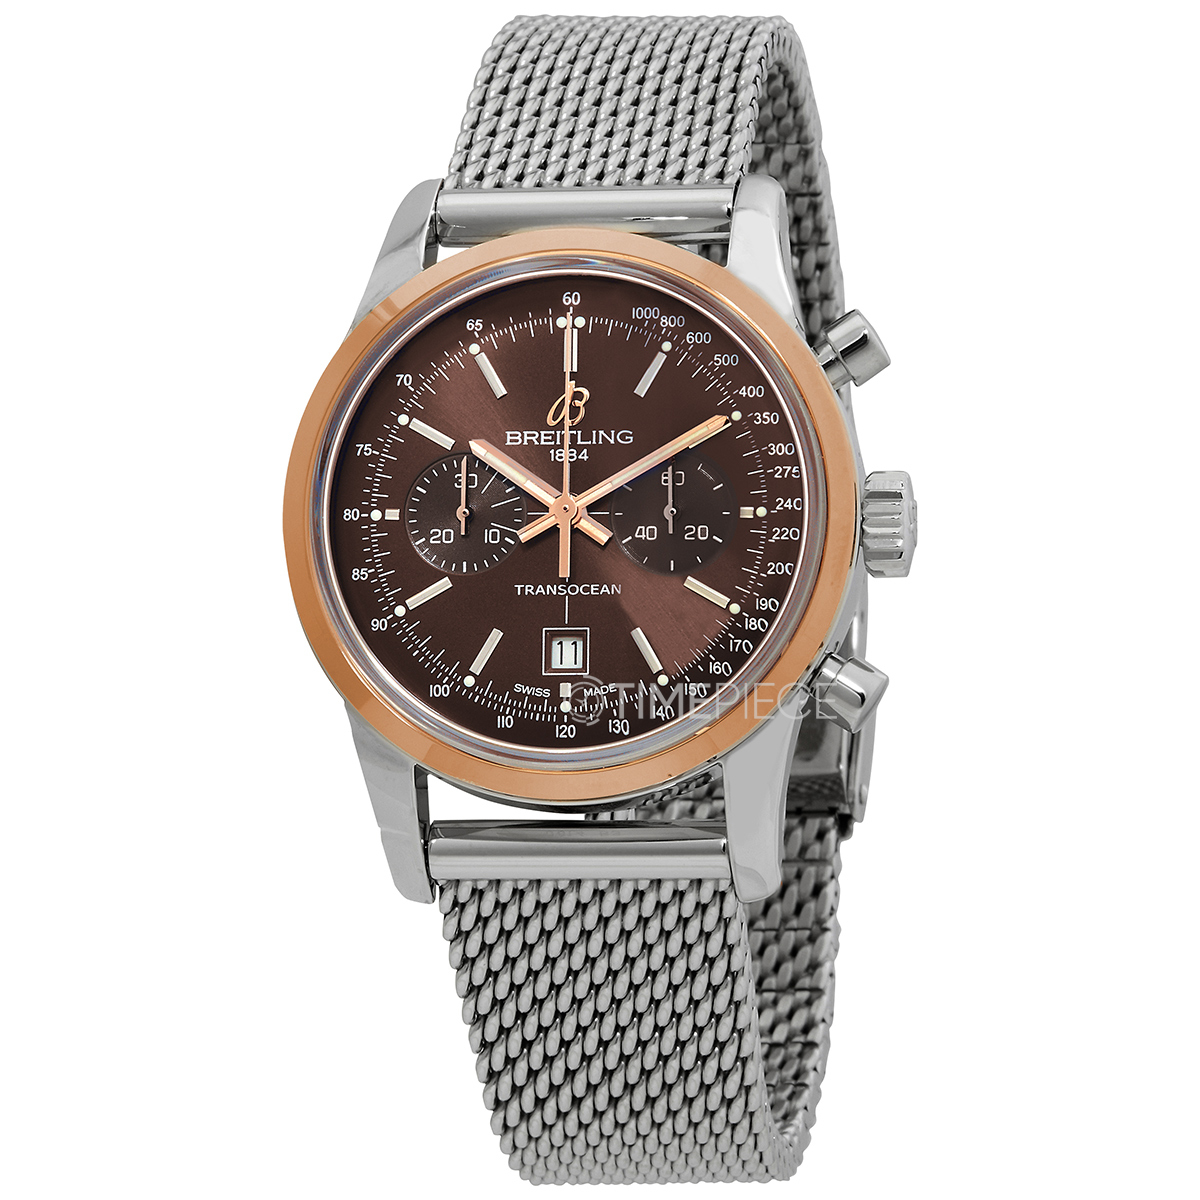 Breitling Transocean Chronograph 38 38 mm Watch in Silver Dial